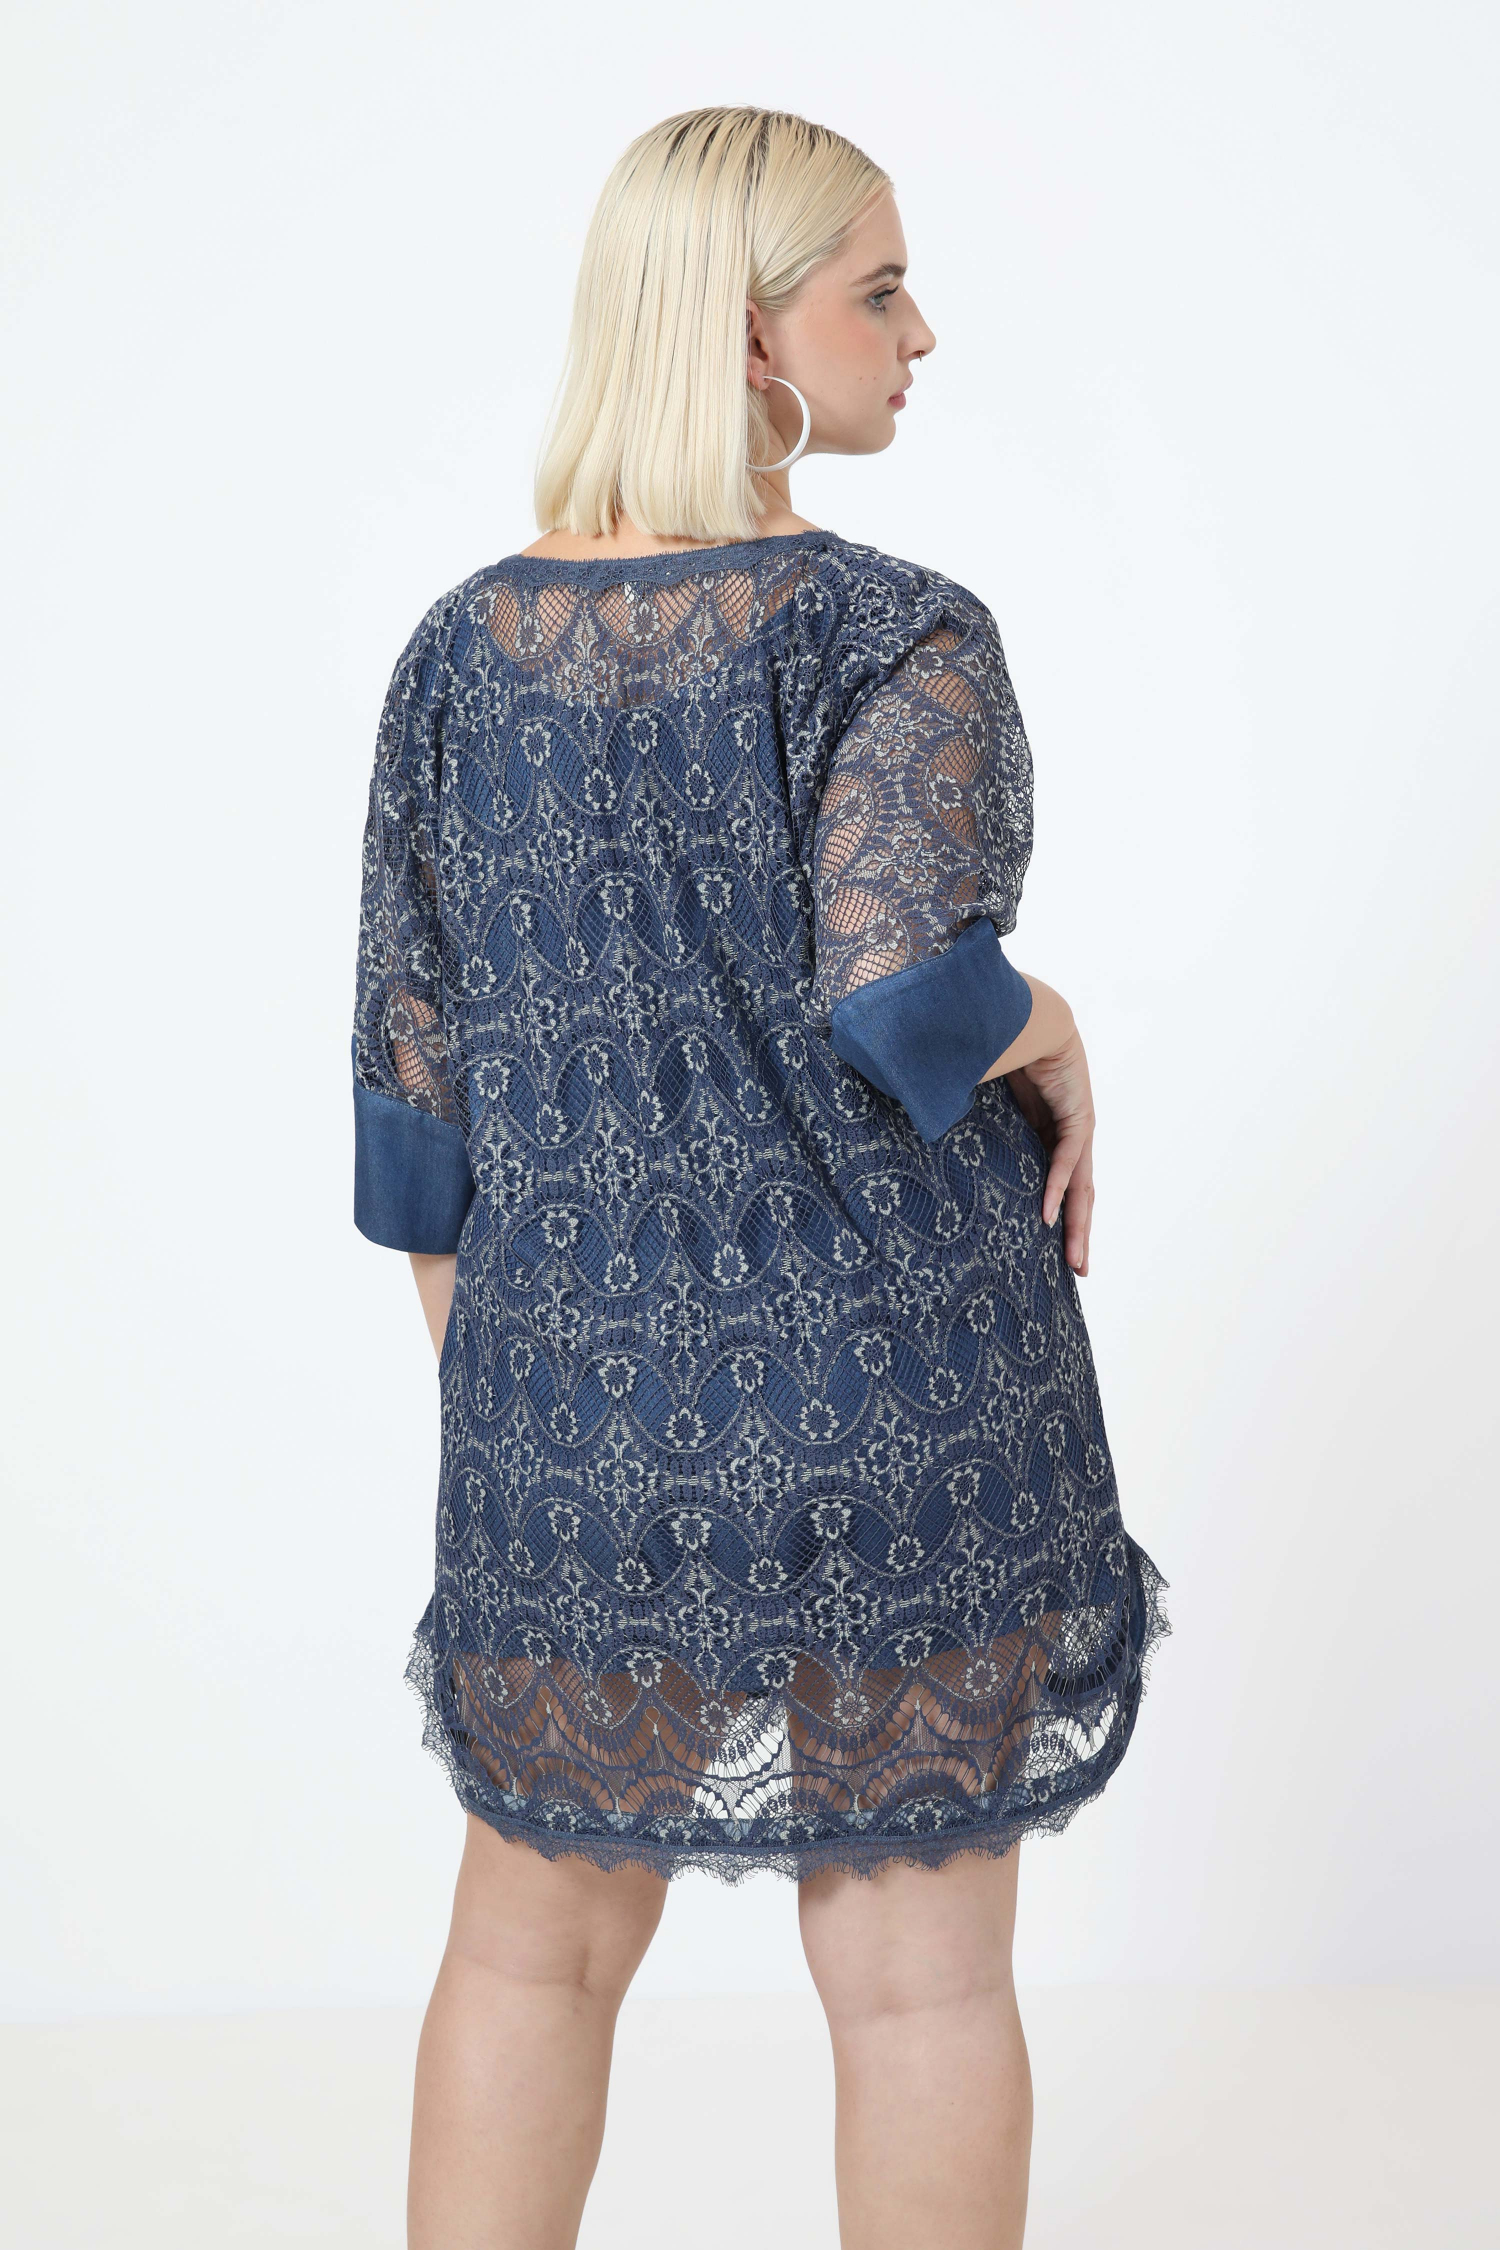 Mesh lace tunic with tank top